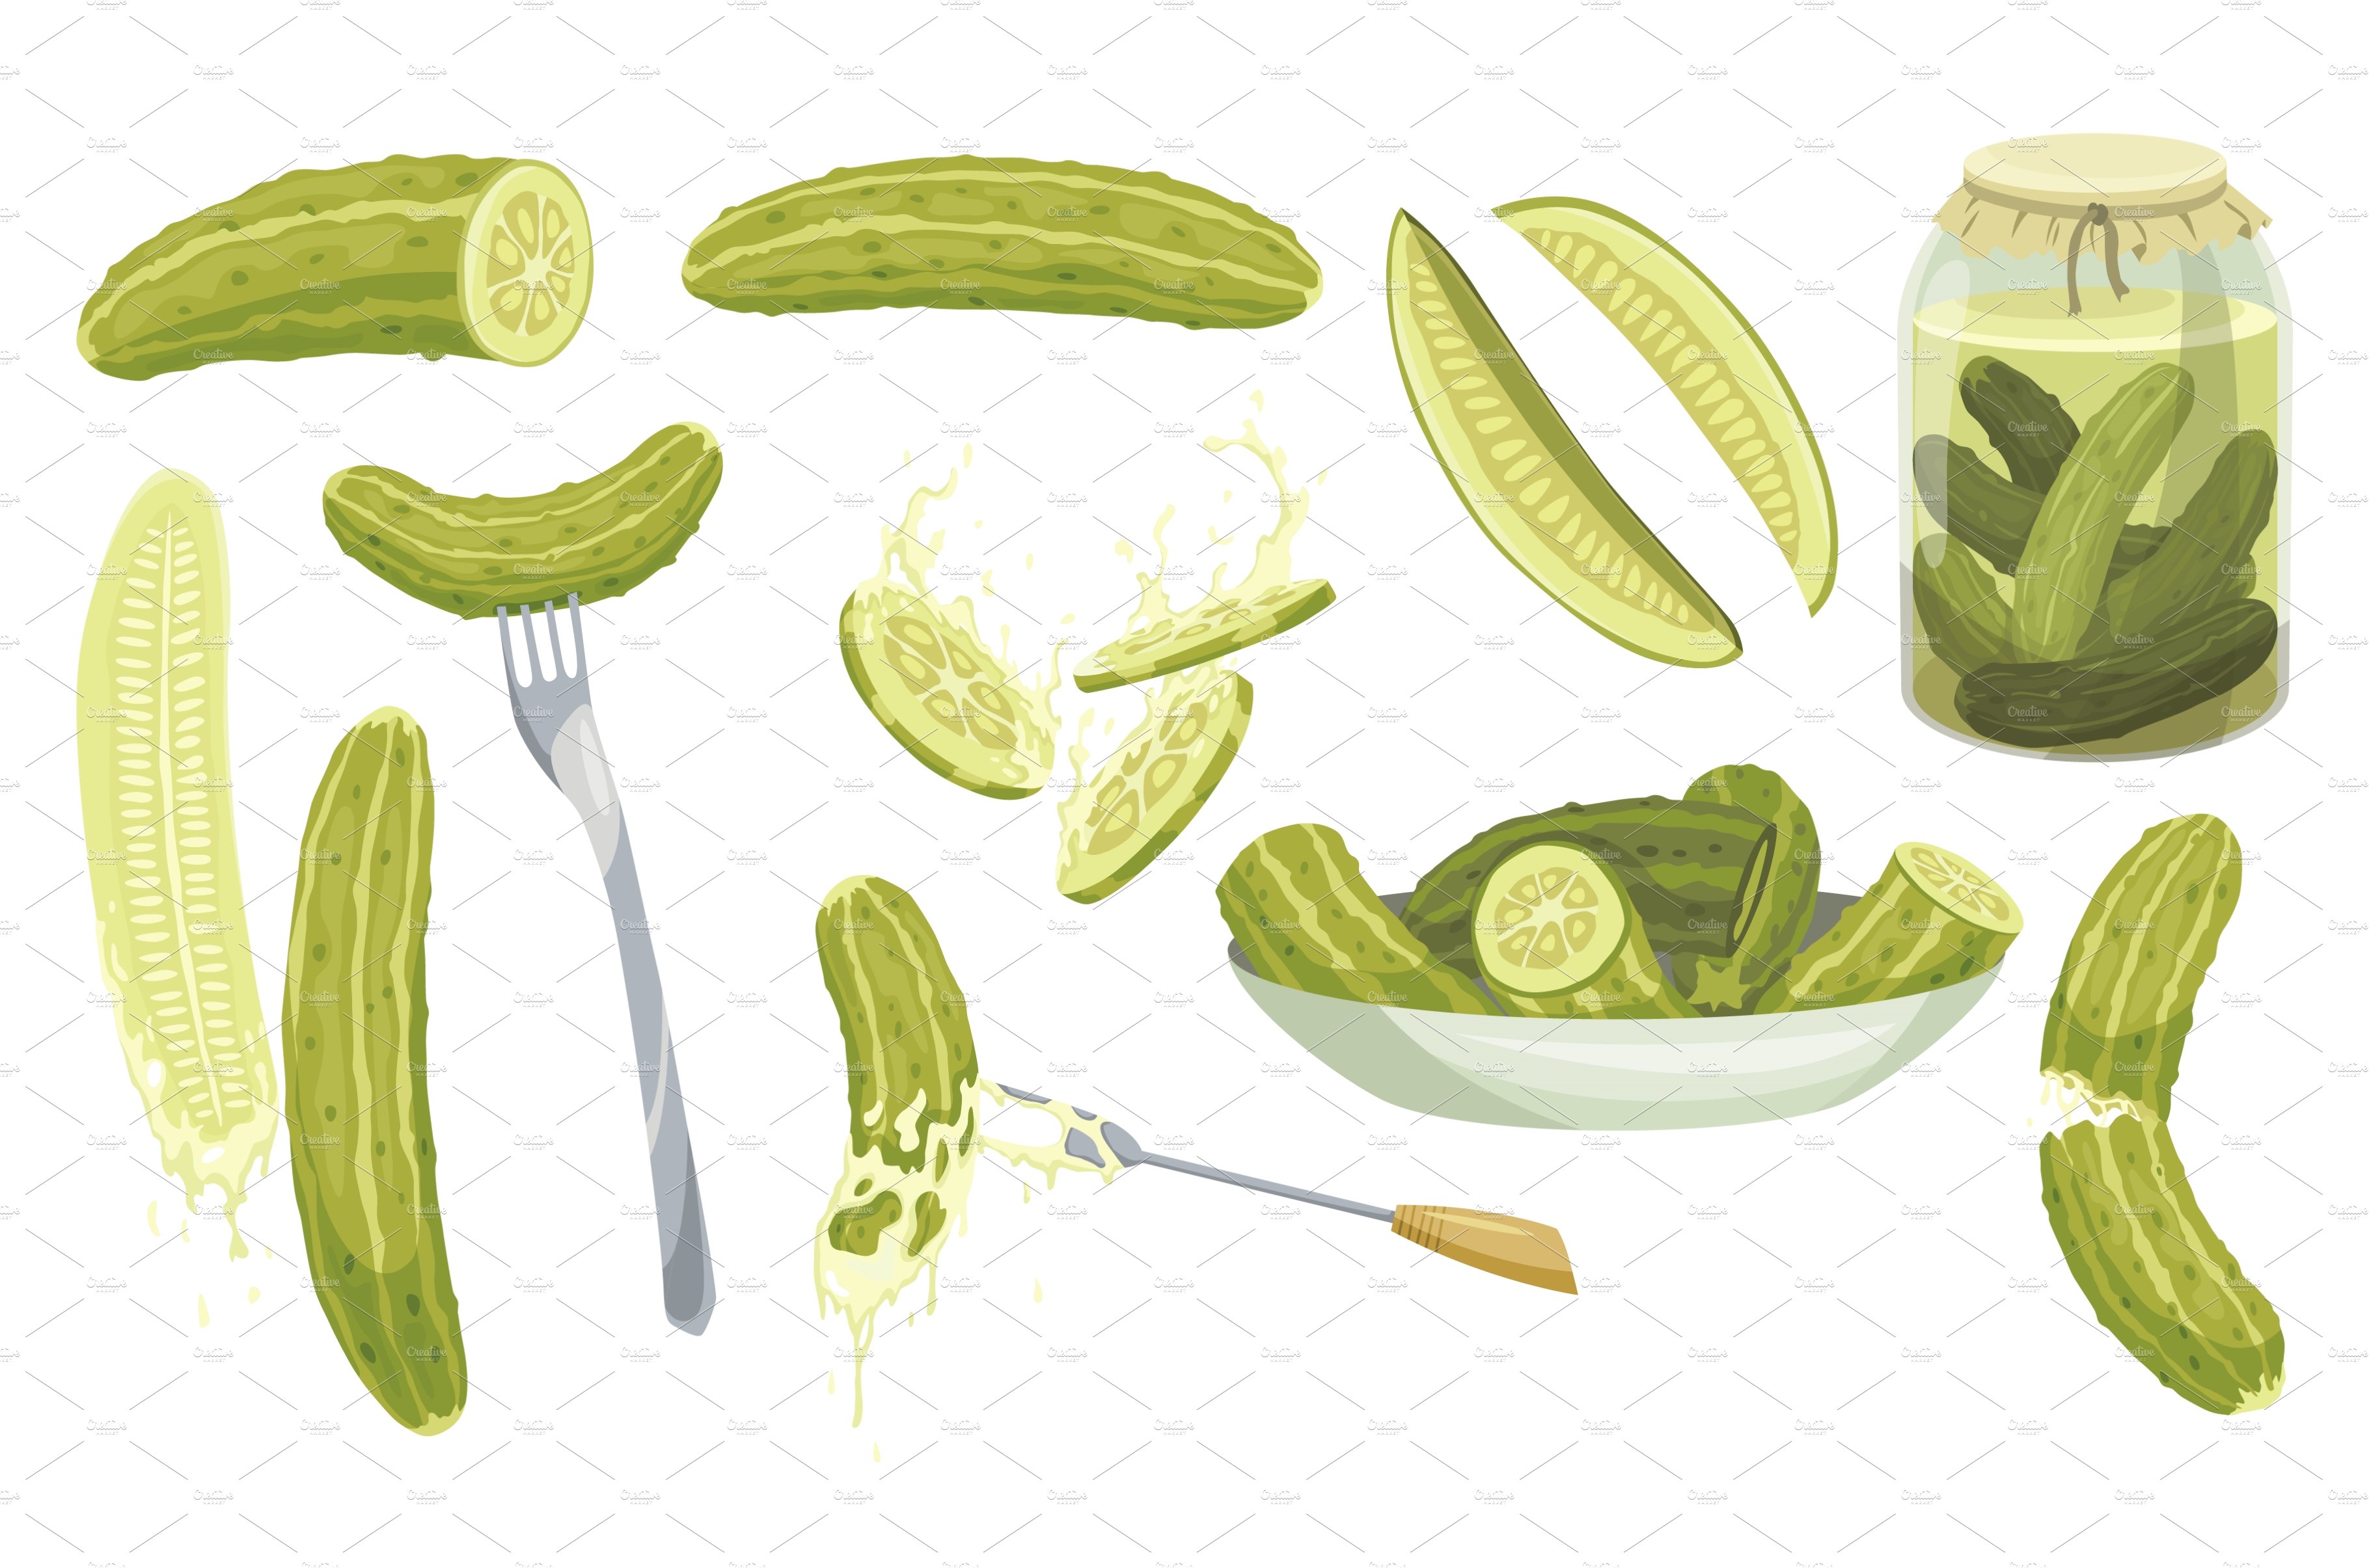 Homemade pickled cucumbers cover image.